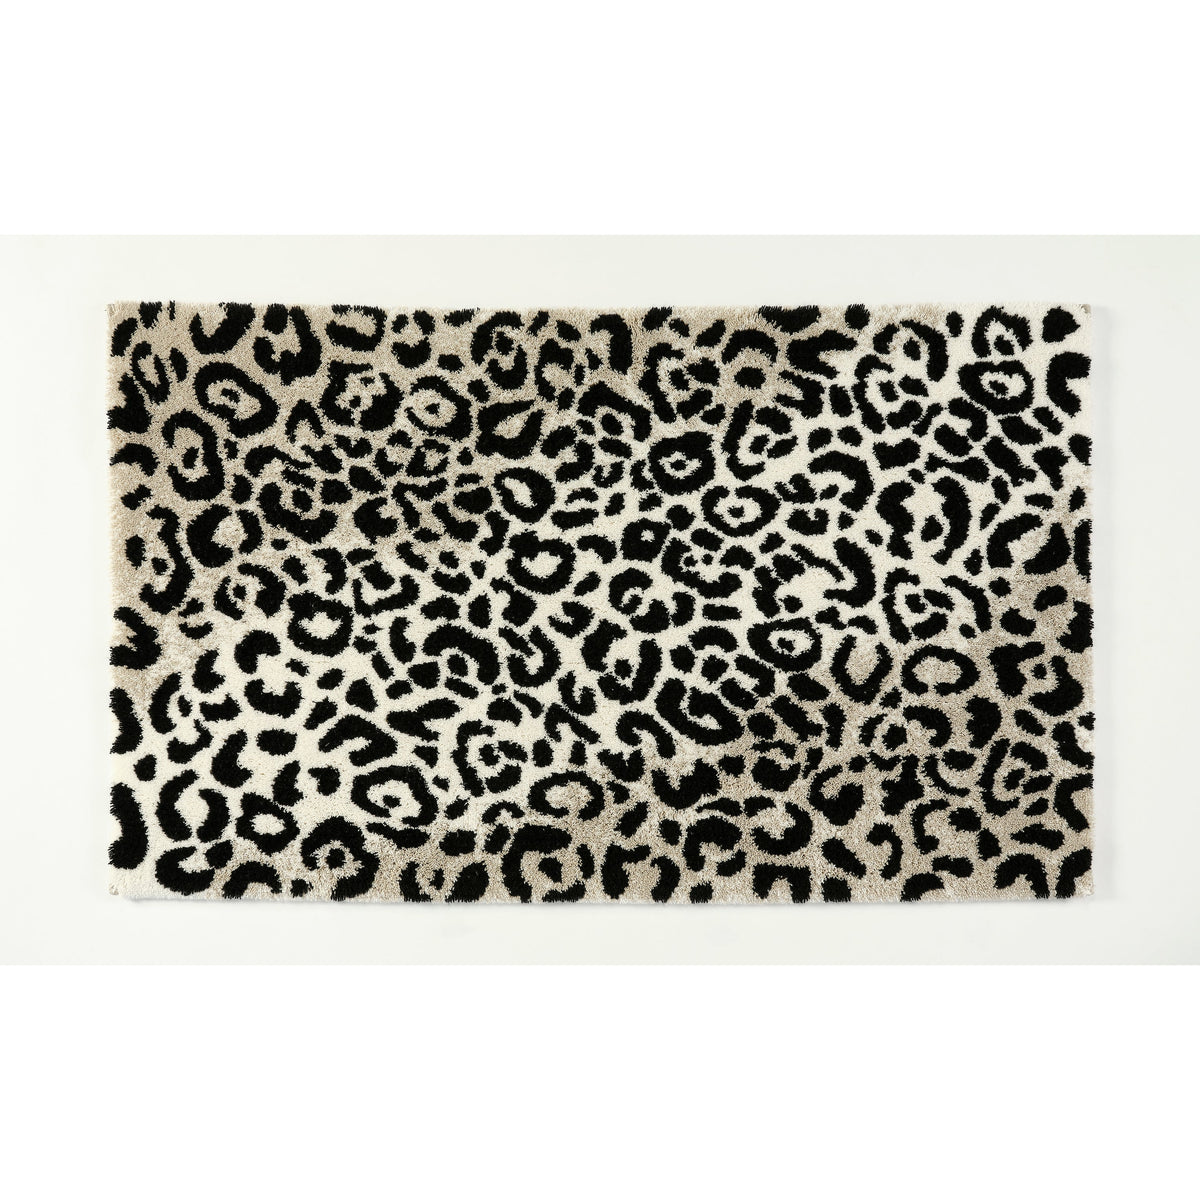 Abyss Habidecor Leopard Bath and Area Rugs Fine Linens